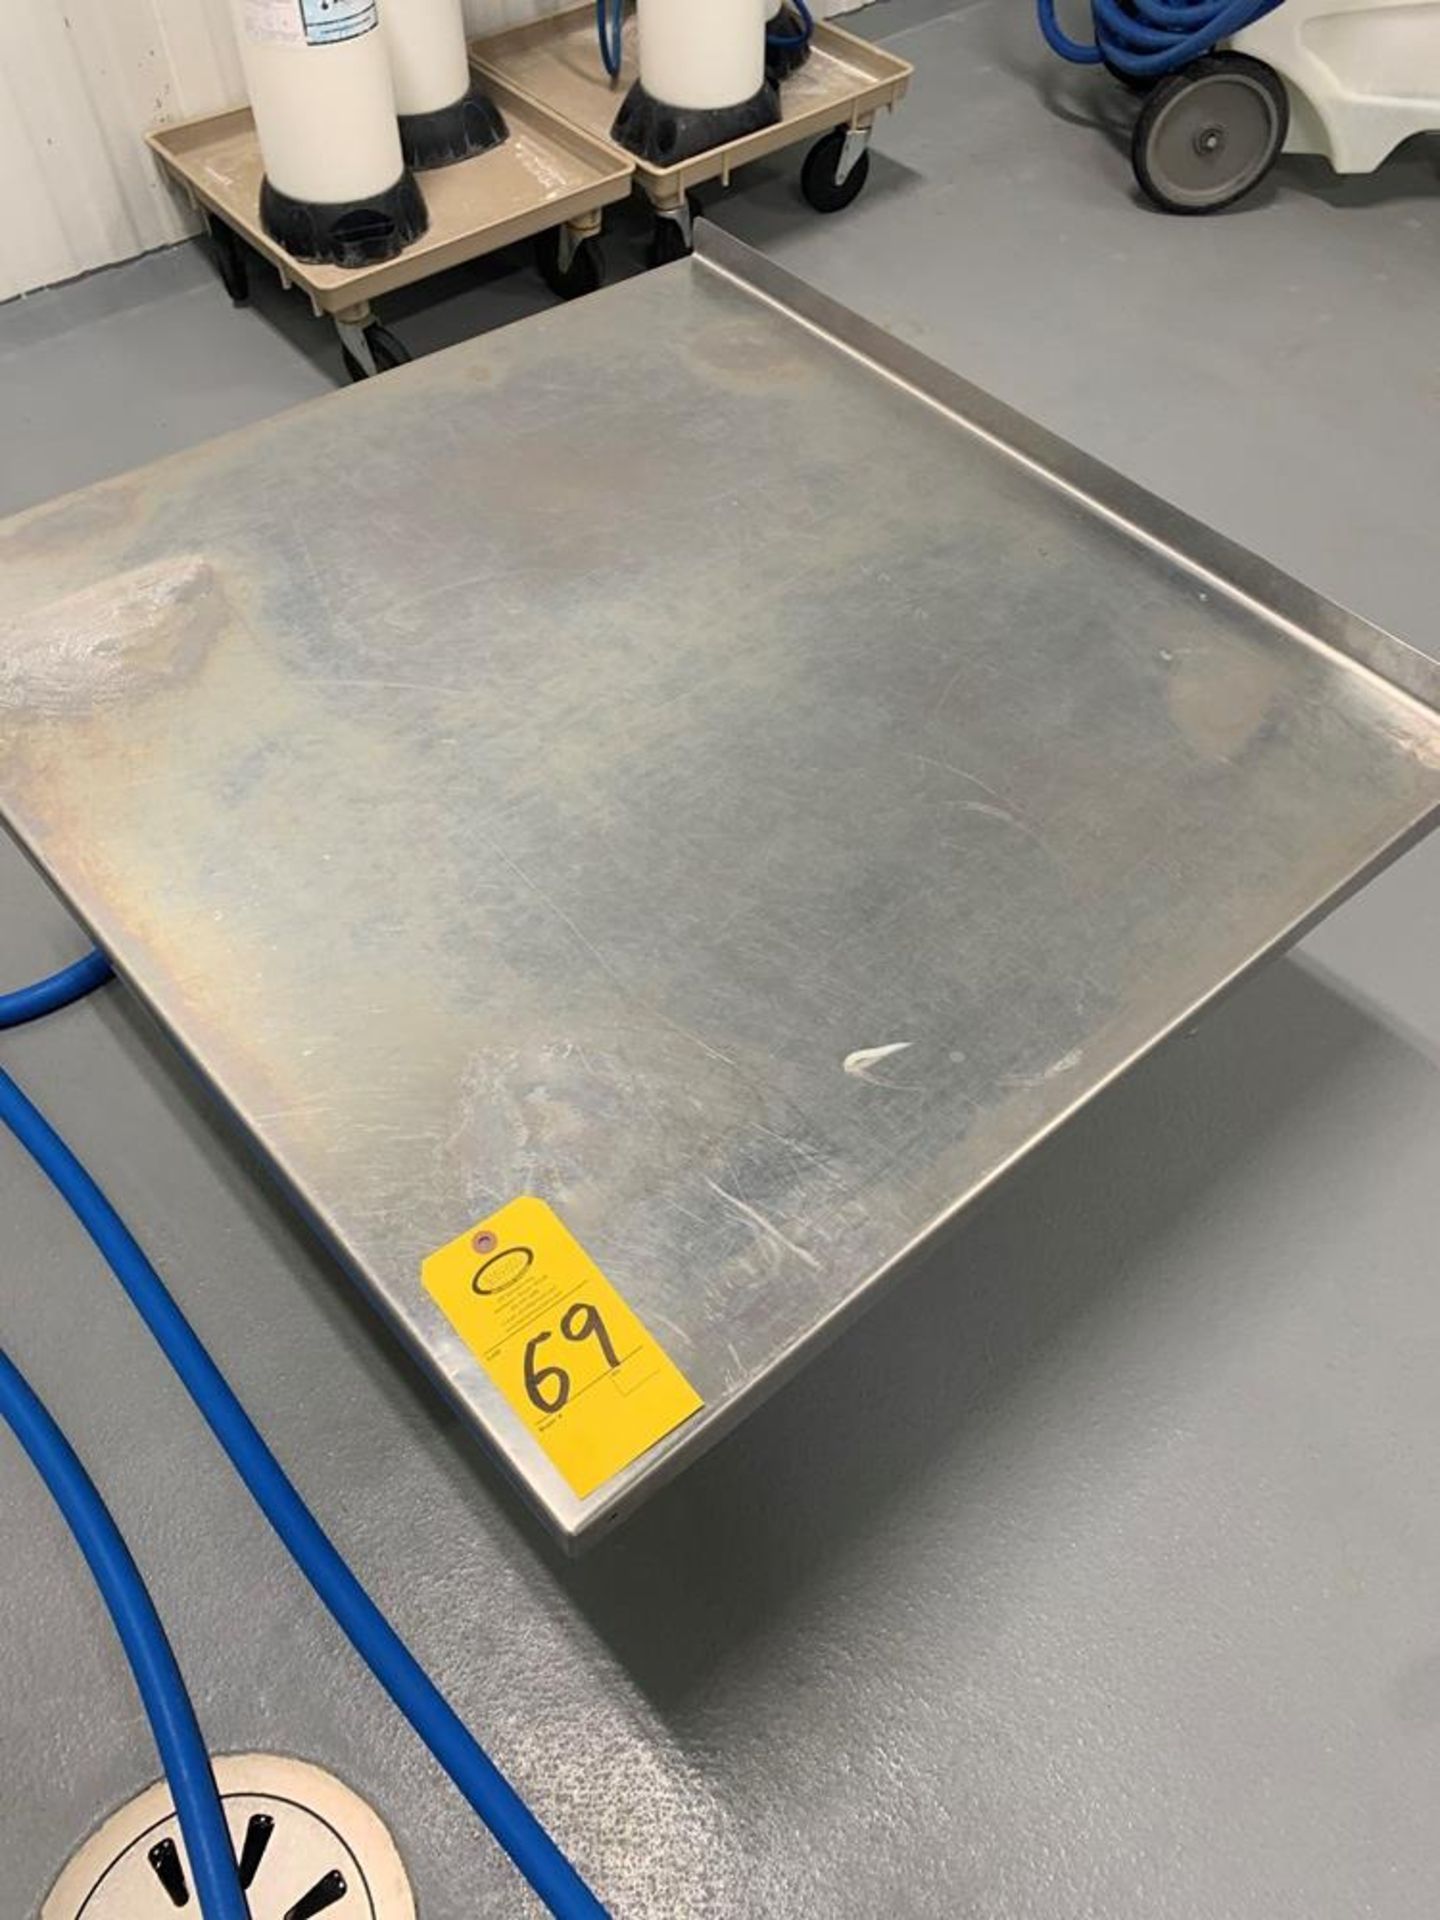 Stainless Steel Equipment Table with bottom shelf, 35" X 36" X 18" (Required Loading Fee: $15.00) NO - Image 3 of 3